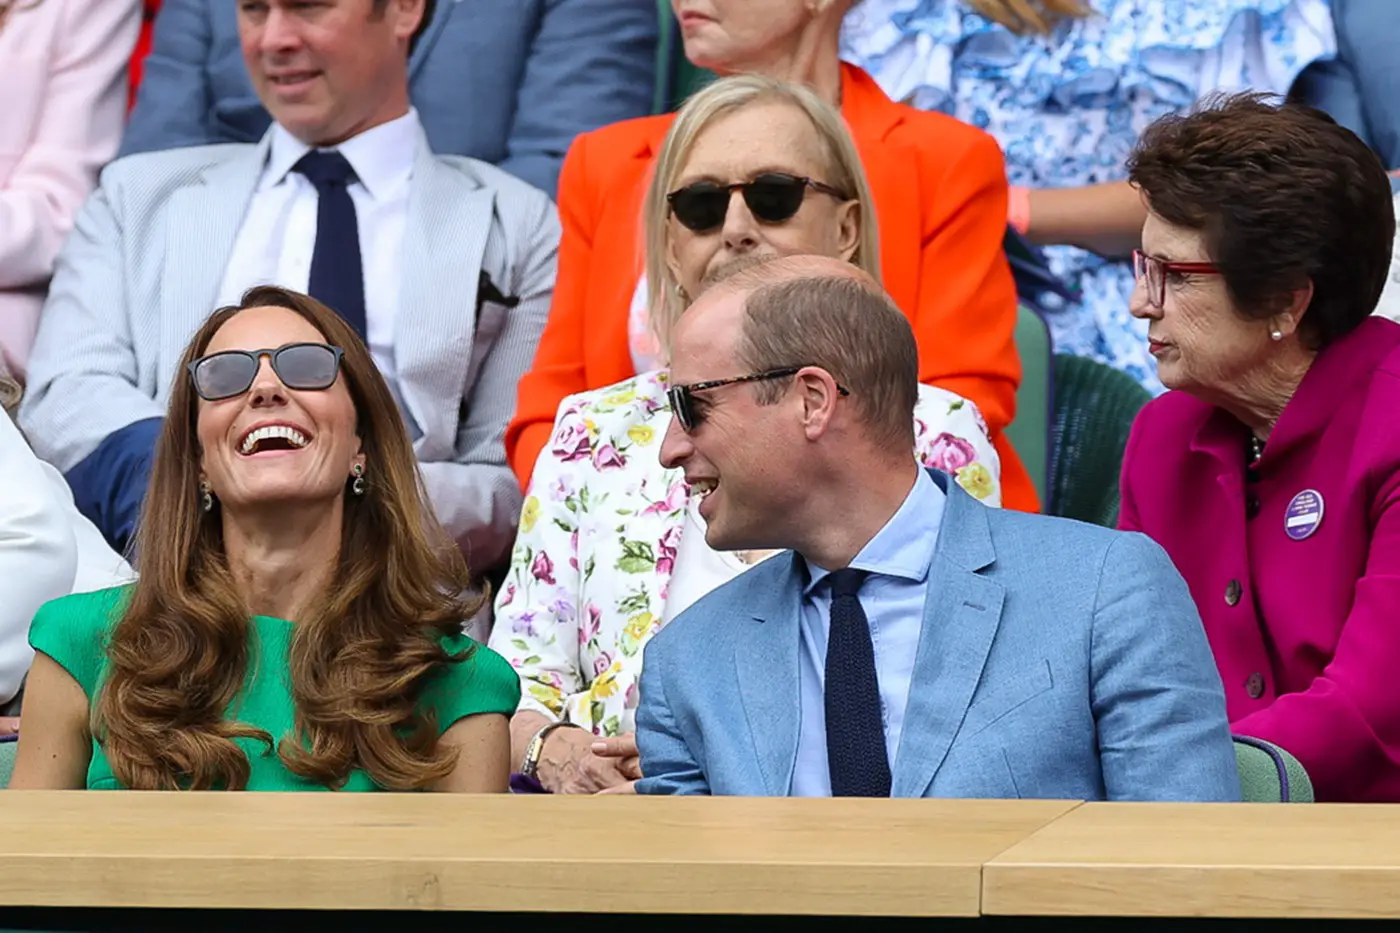 Prince William and Duchess Catherine watched the match from the Royal Box